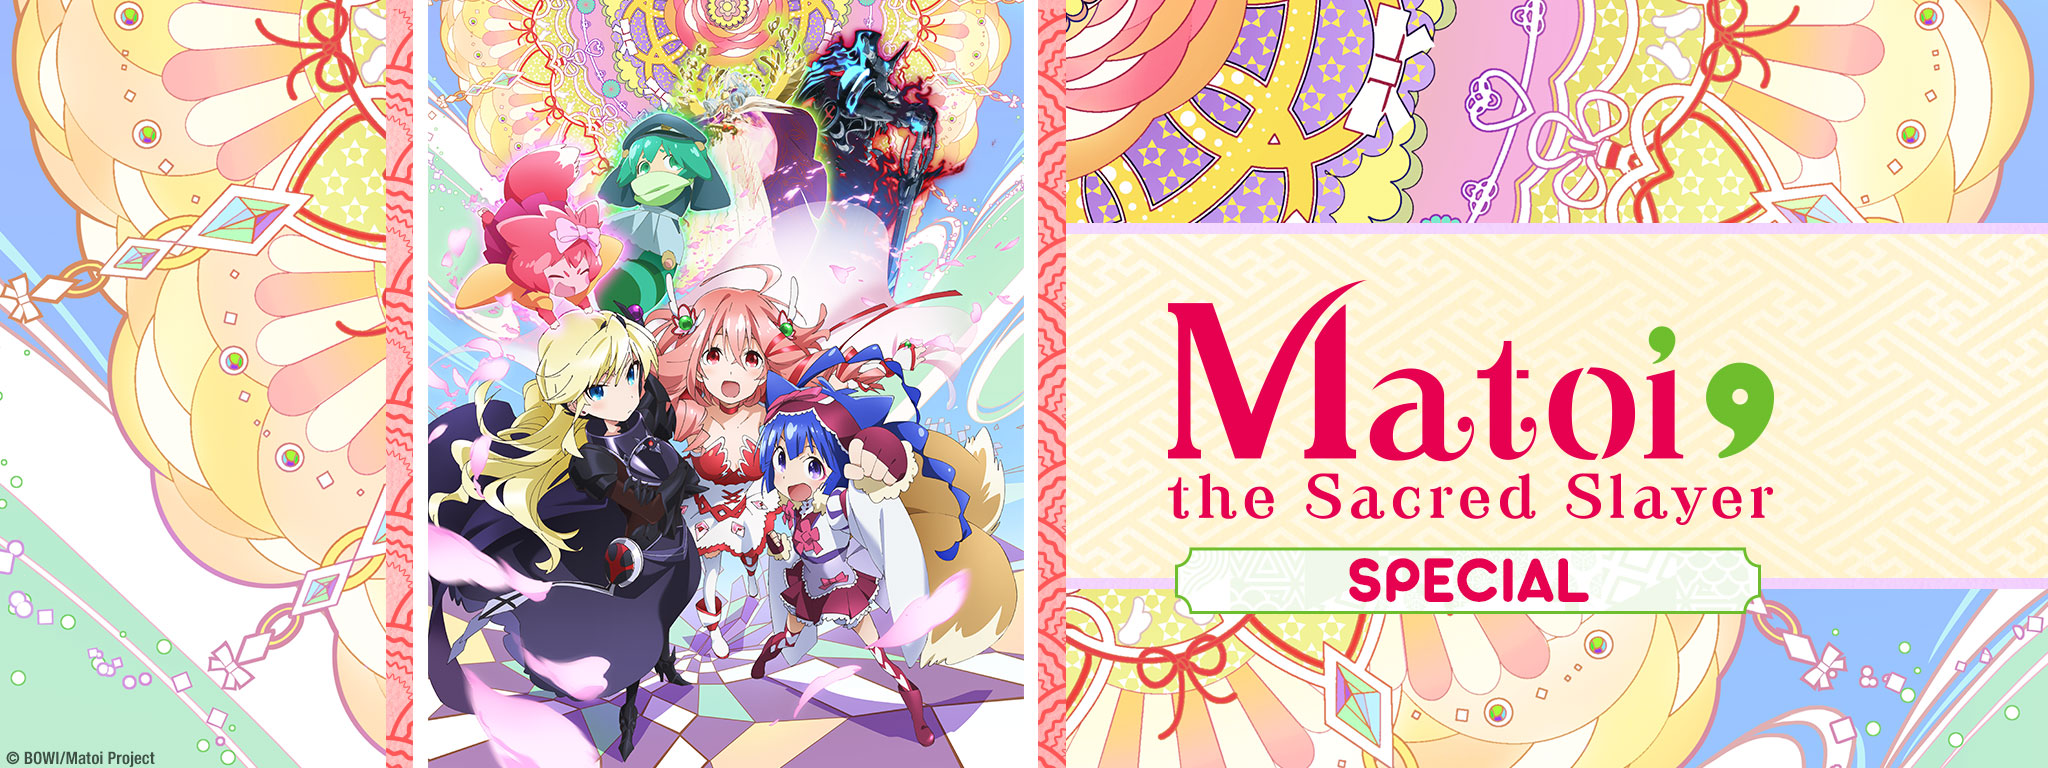 Title Art for Matoi the Sacred Slayer Special